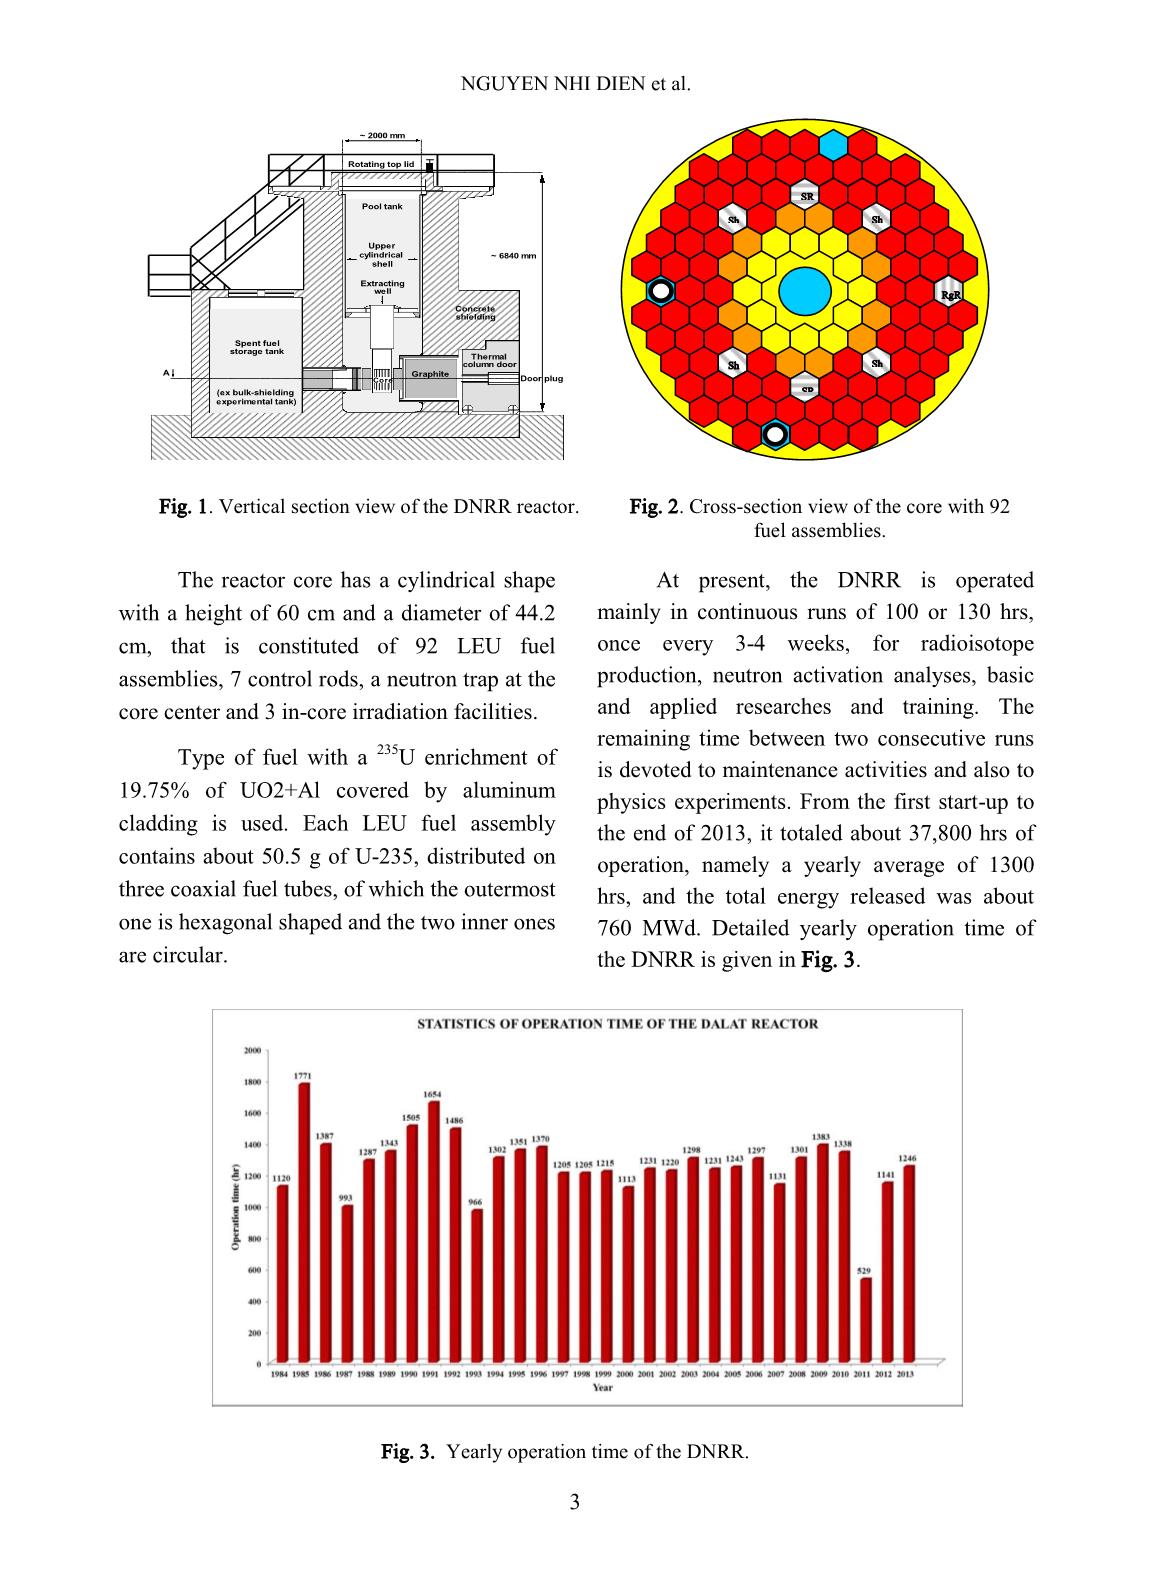 Nuclear Science and Technology - Volume 4, Number 1, March 2014 trang 6